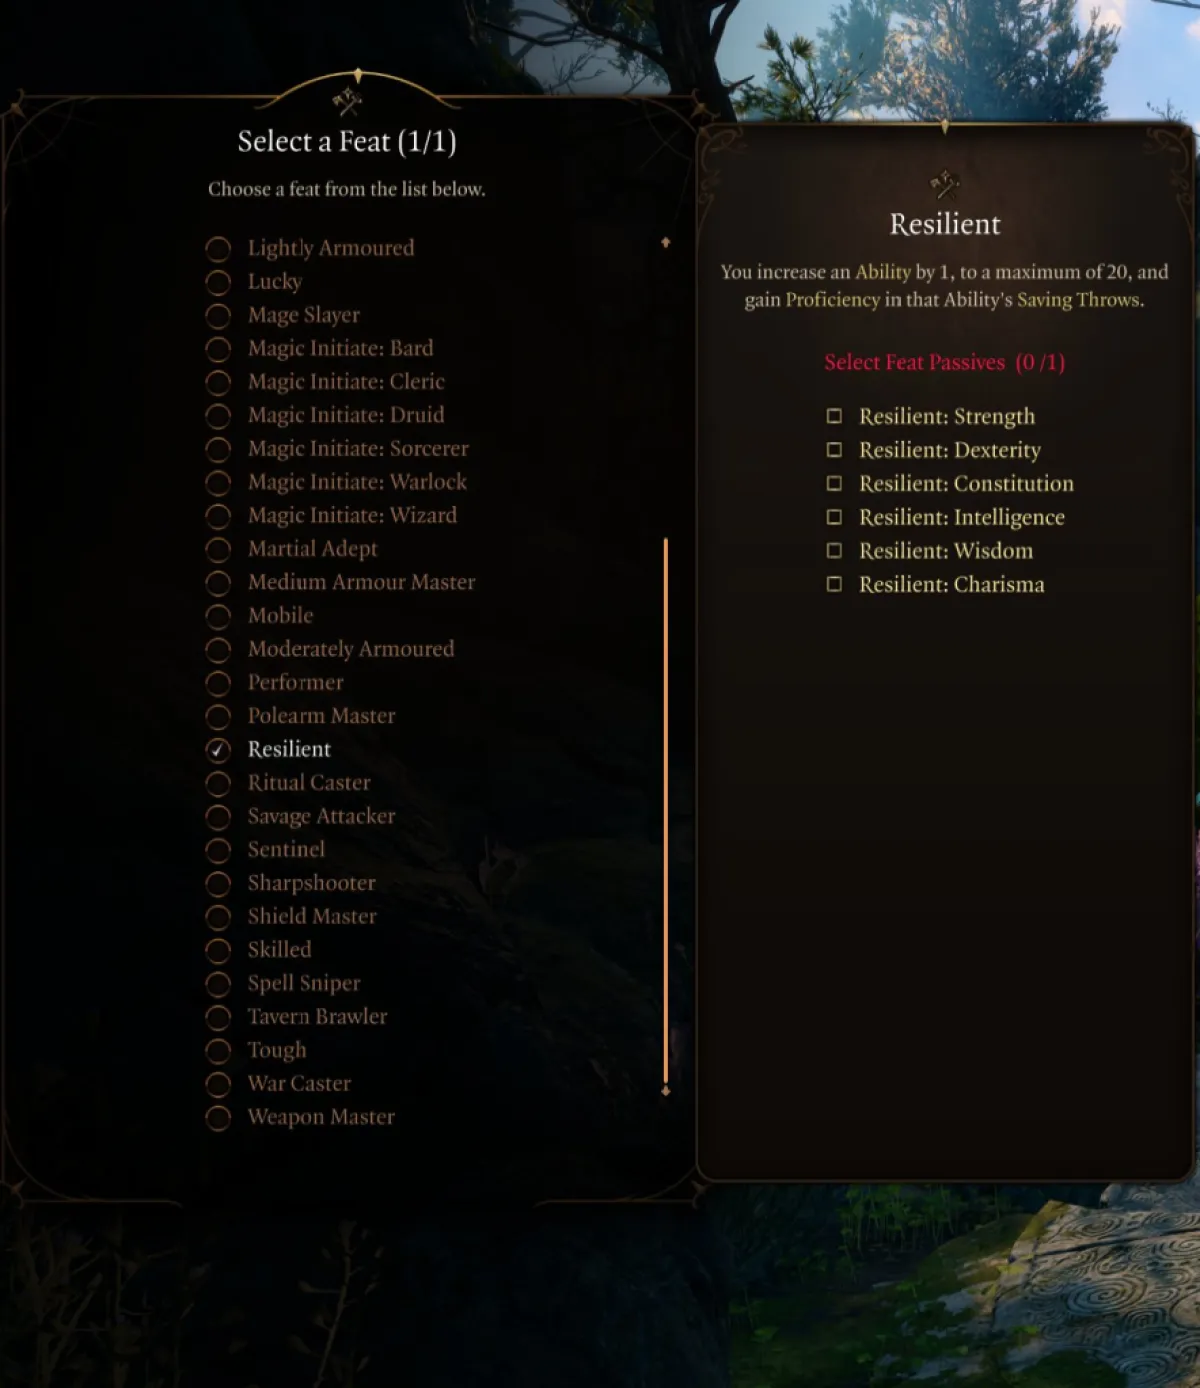 An image showing the Resilient feat in Baldur's Gate 3 BG3 as part of a best builds guide for Druids.